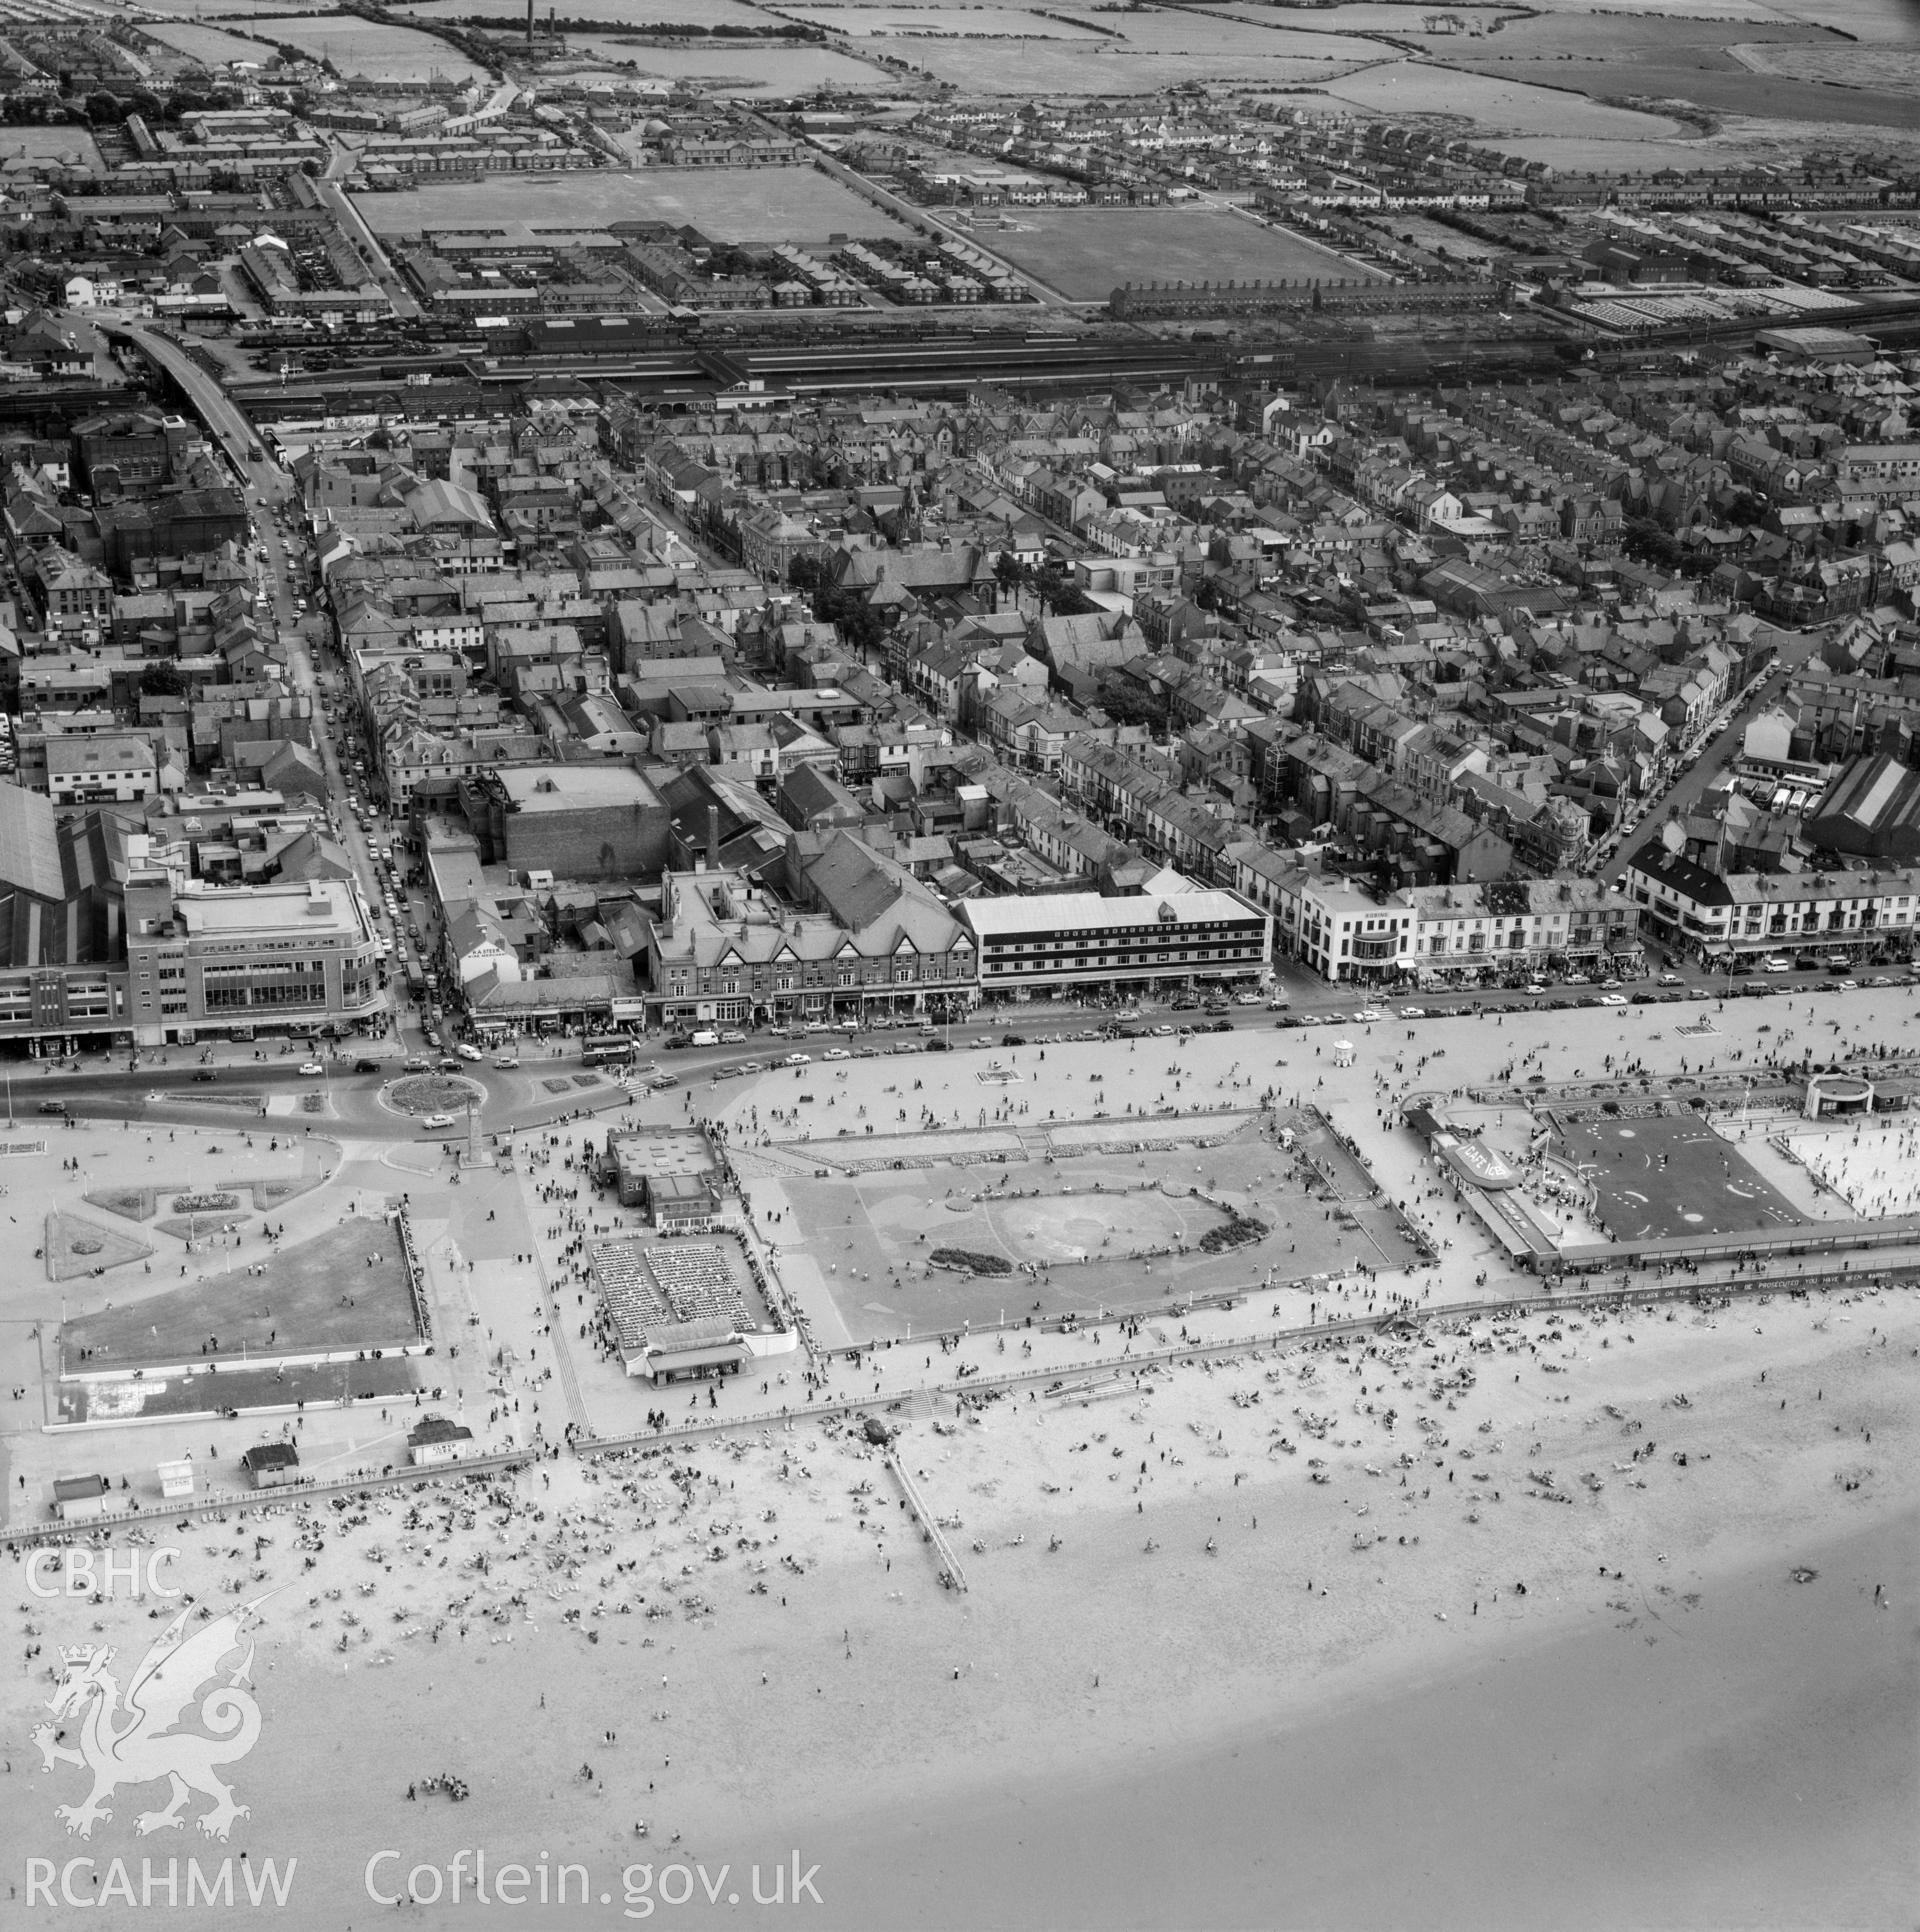 Black and white oblique aerial photograph showing the seafront area of the town of Rhyl  dated 18th July 1961, from Aerofilms album Flints M-Z (W17).